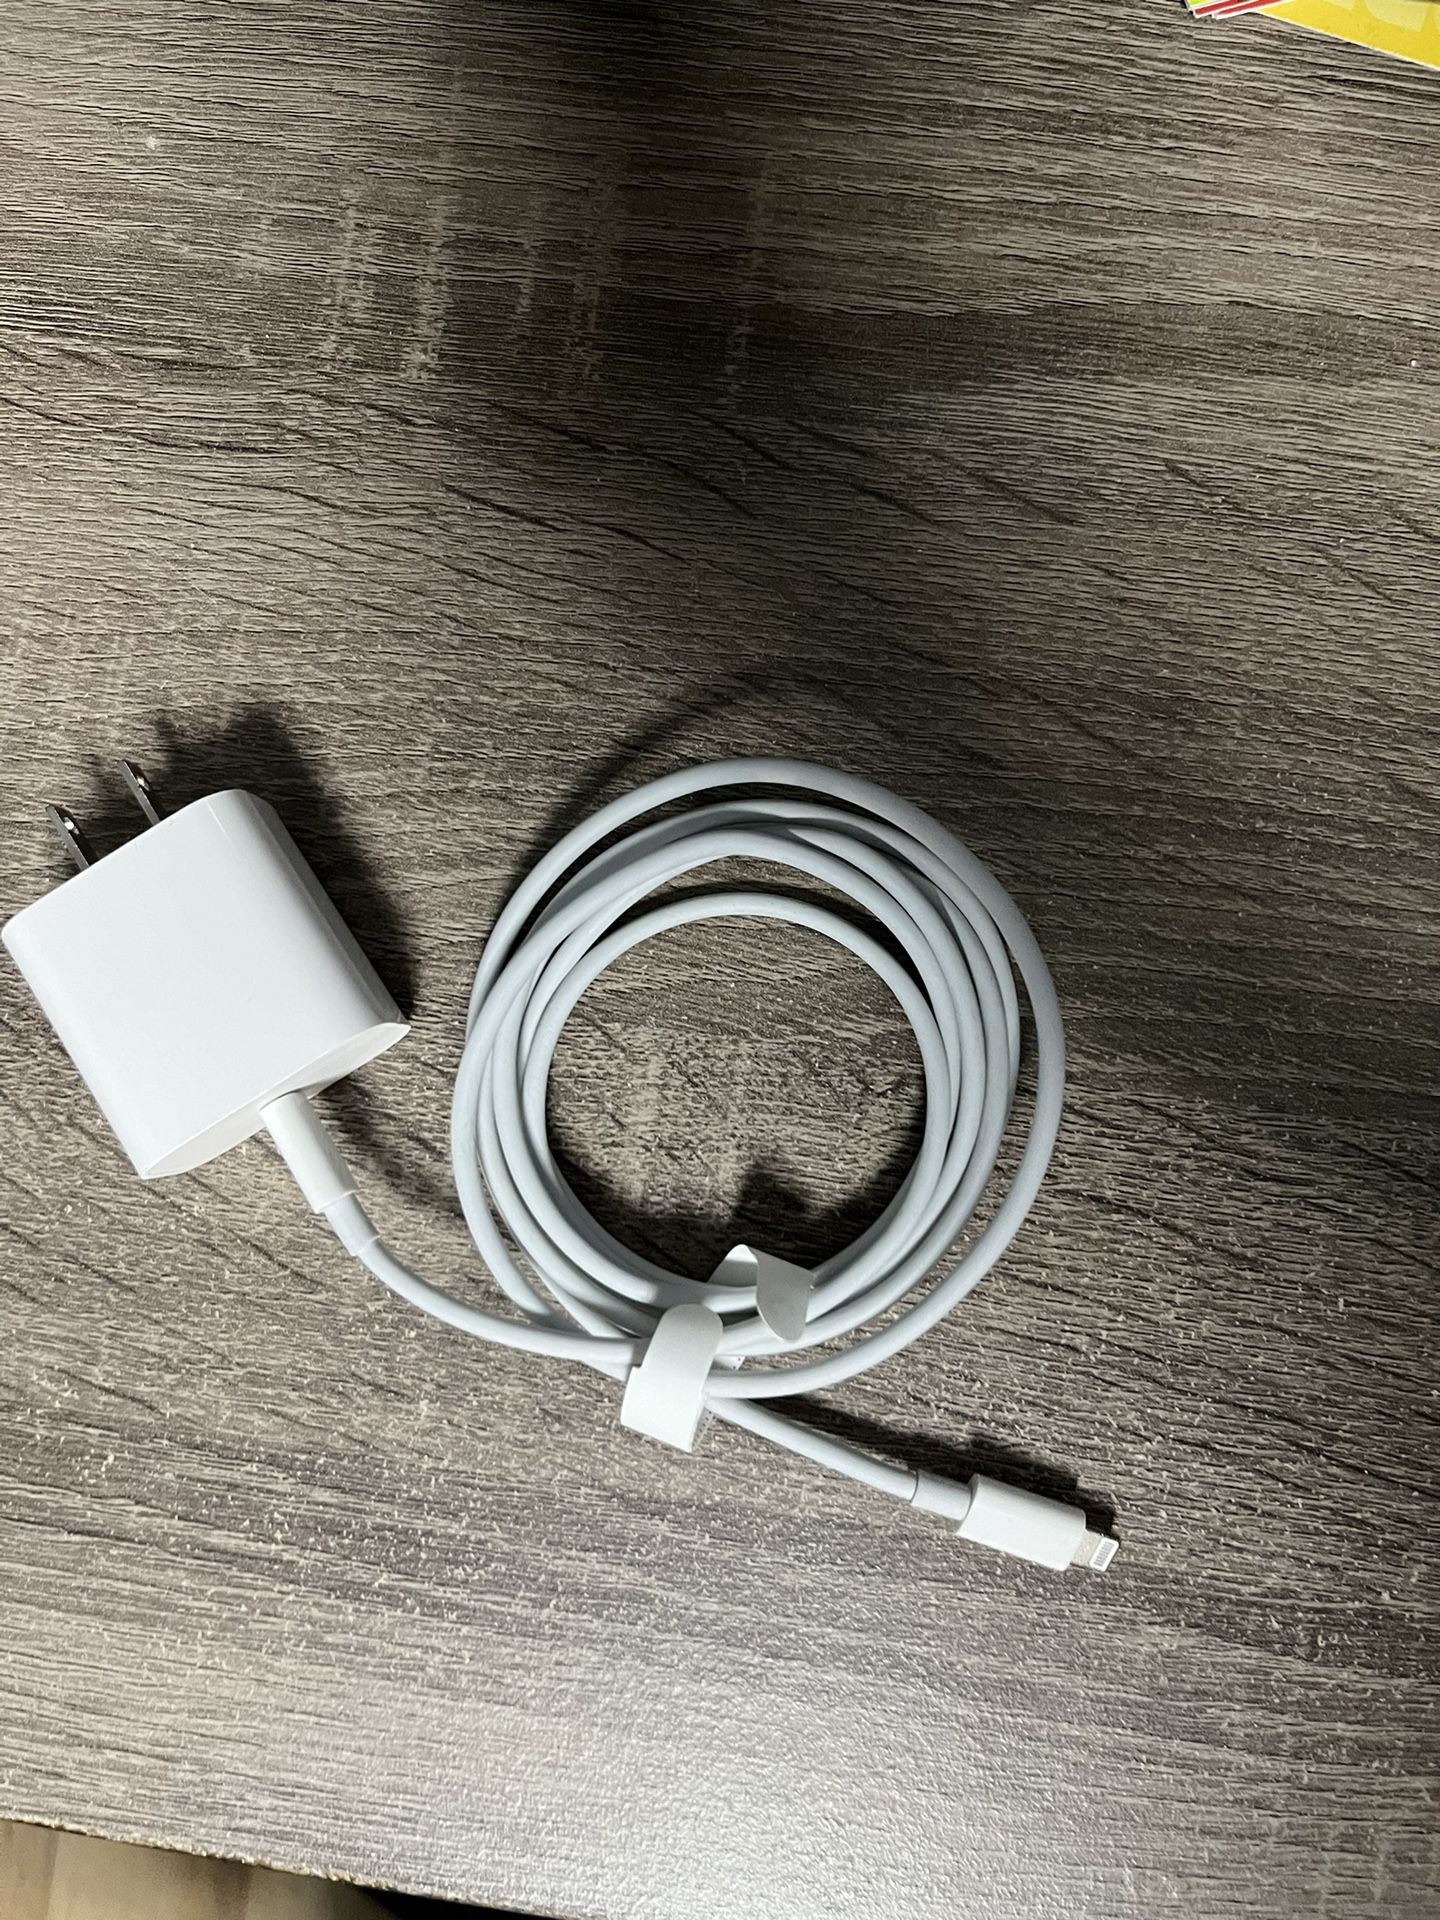 IPhone Charger With Block